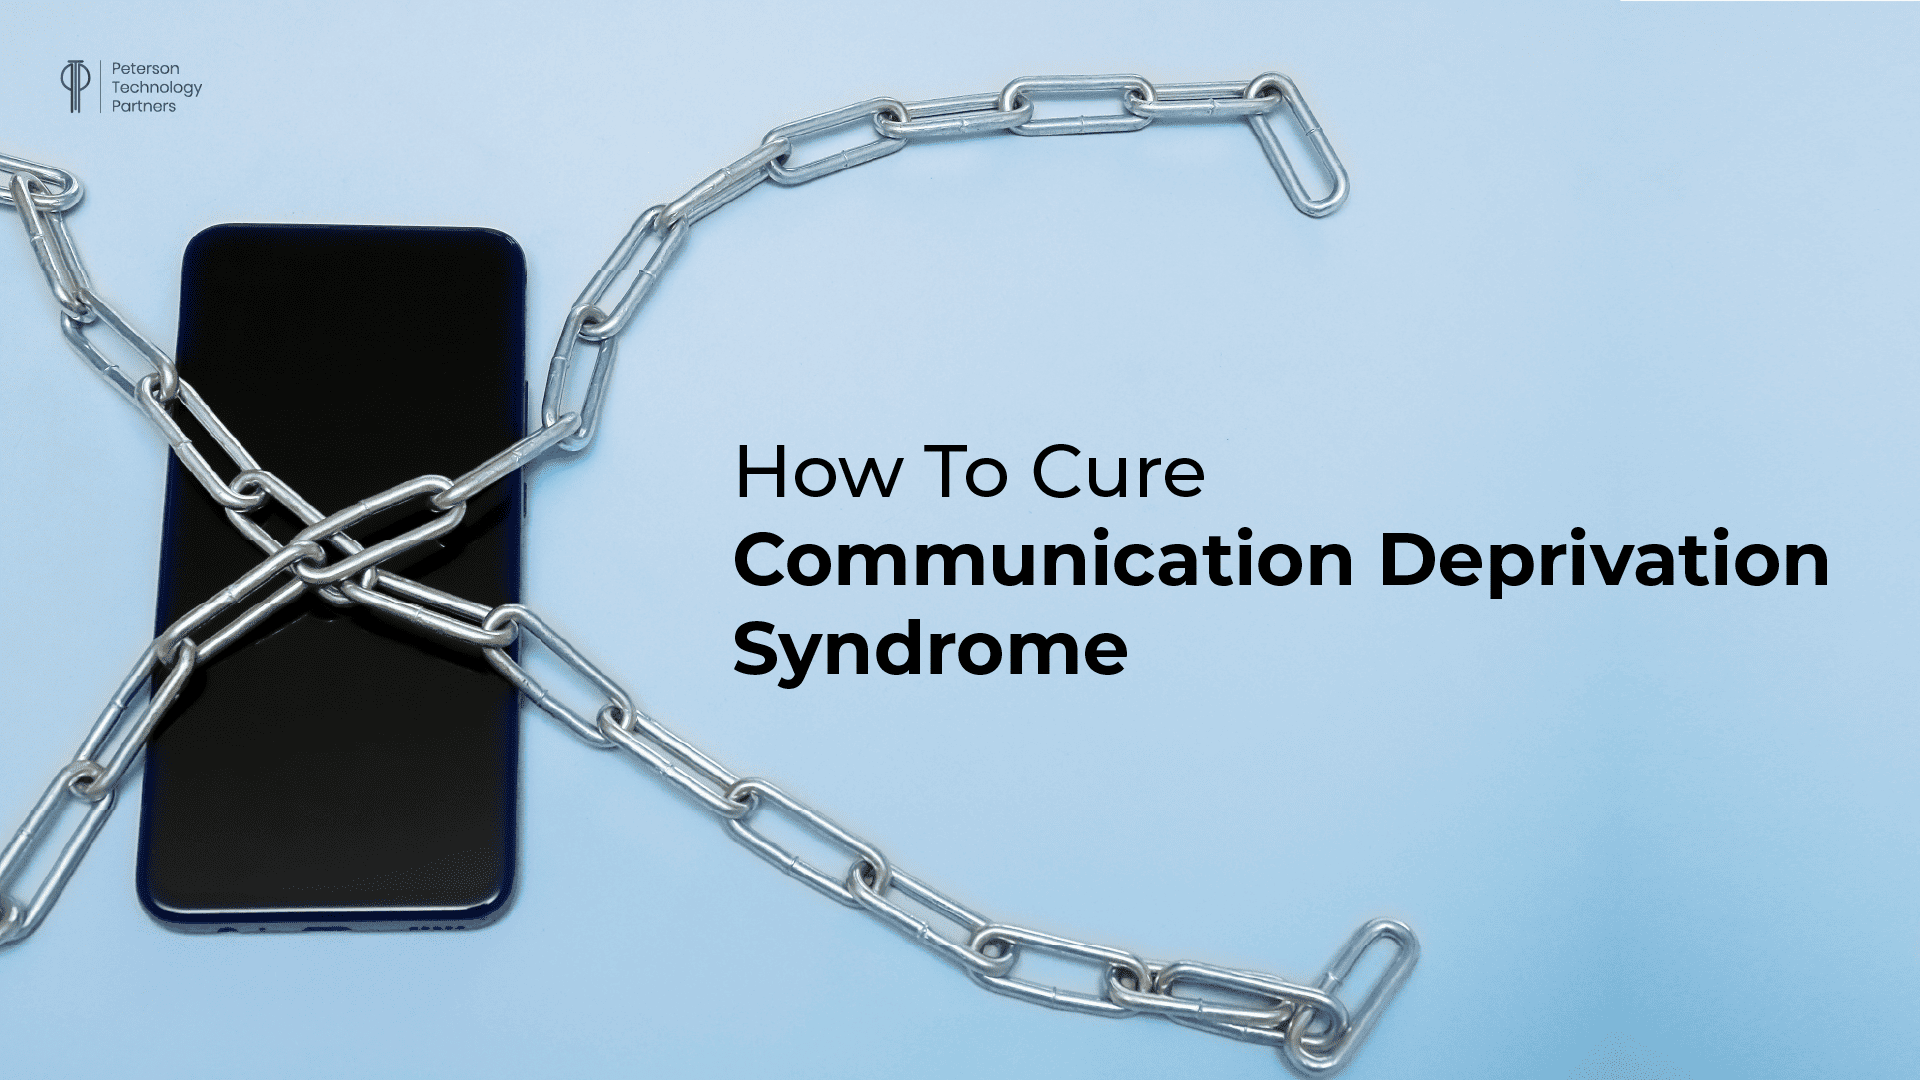 How to Cure Communication Deprivation Syndrome